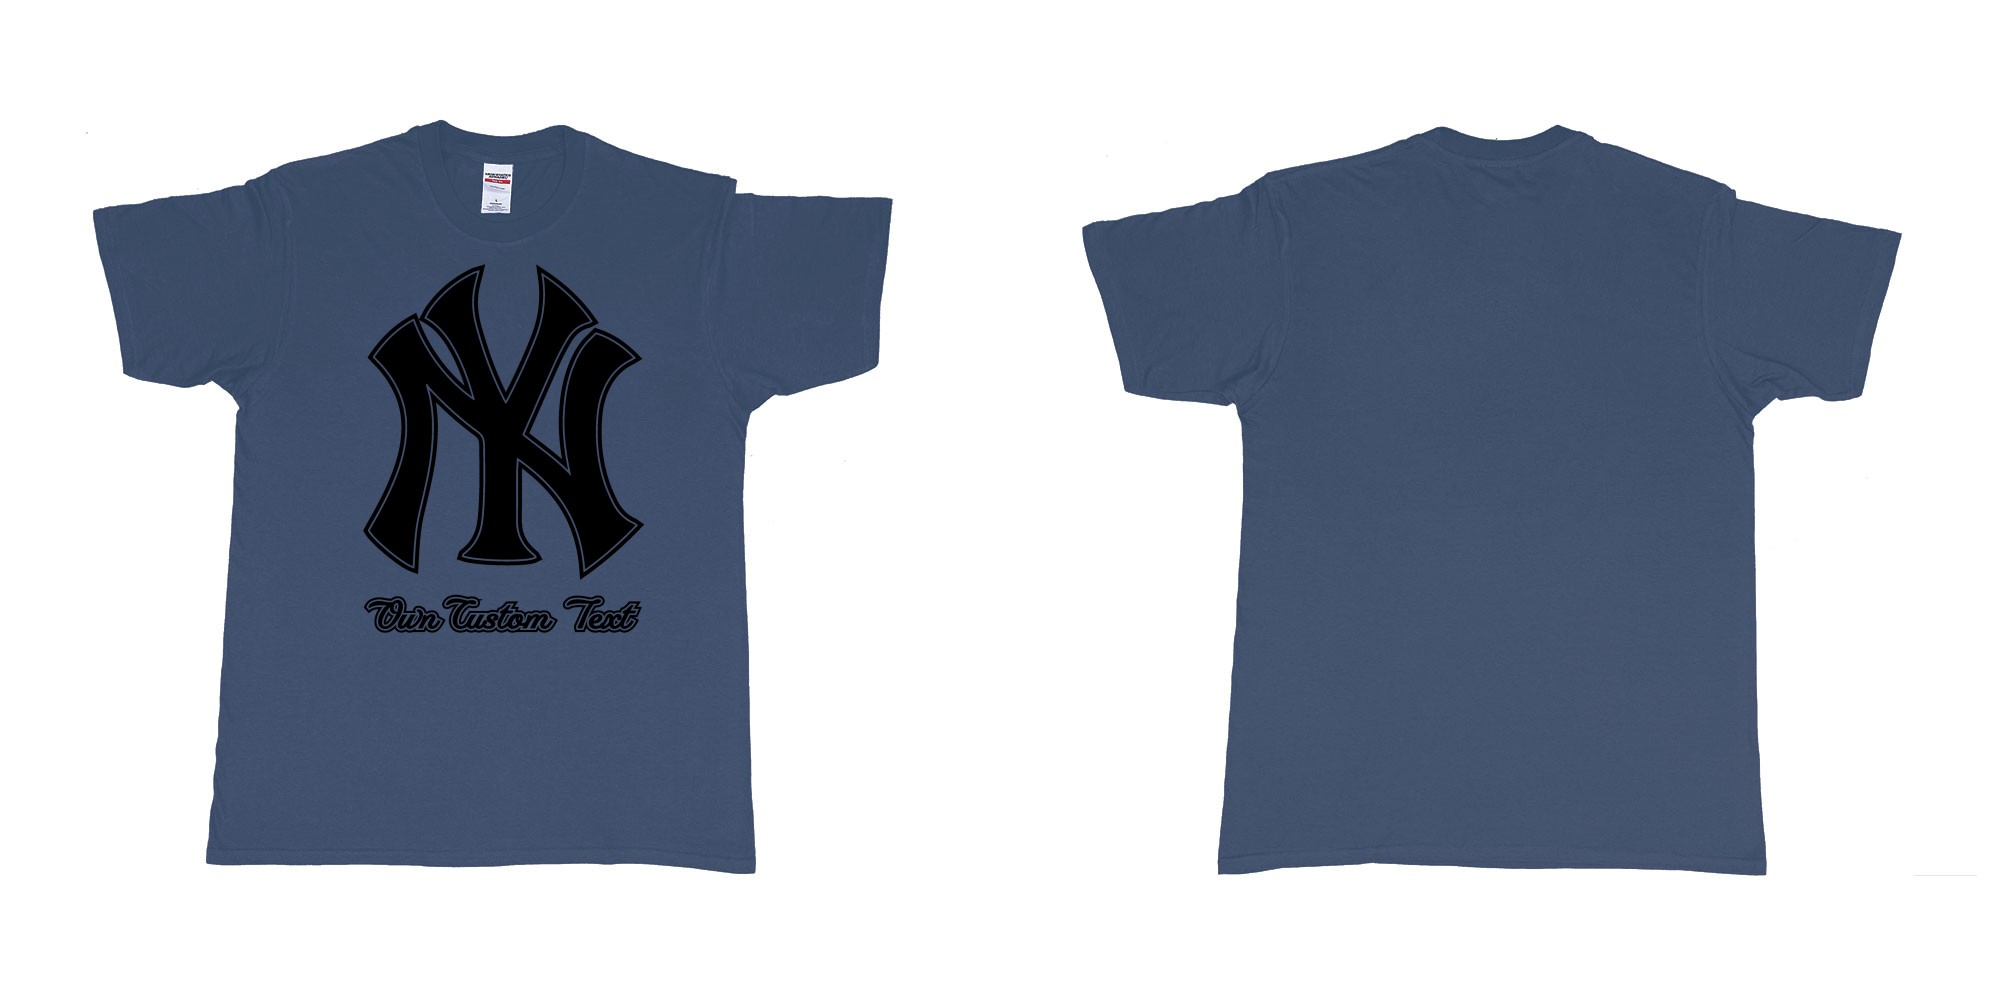 Custom tshirt design new york yankees baseball team custom design in fabric color navy choice your own text made in Bali by The Pirate Way